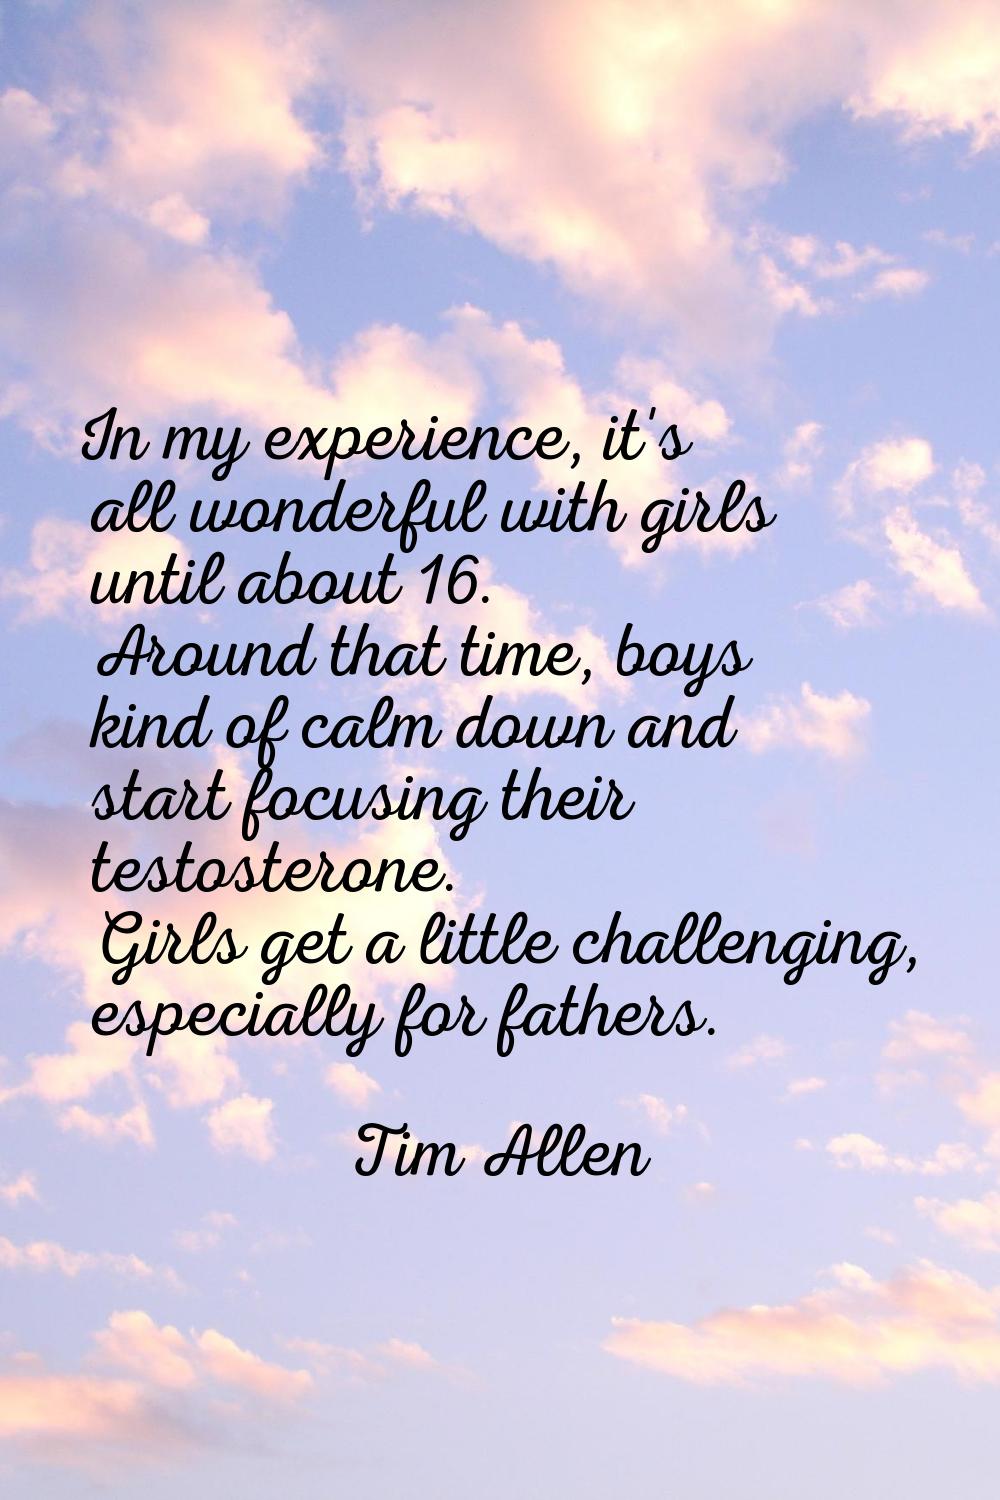 In my experience, it's all wonderful with girls until about 16. Around that time, boys kind of calm